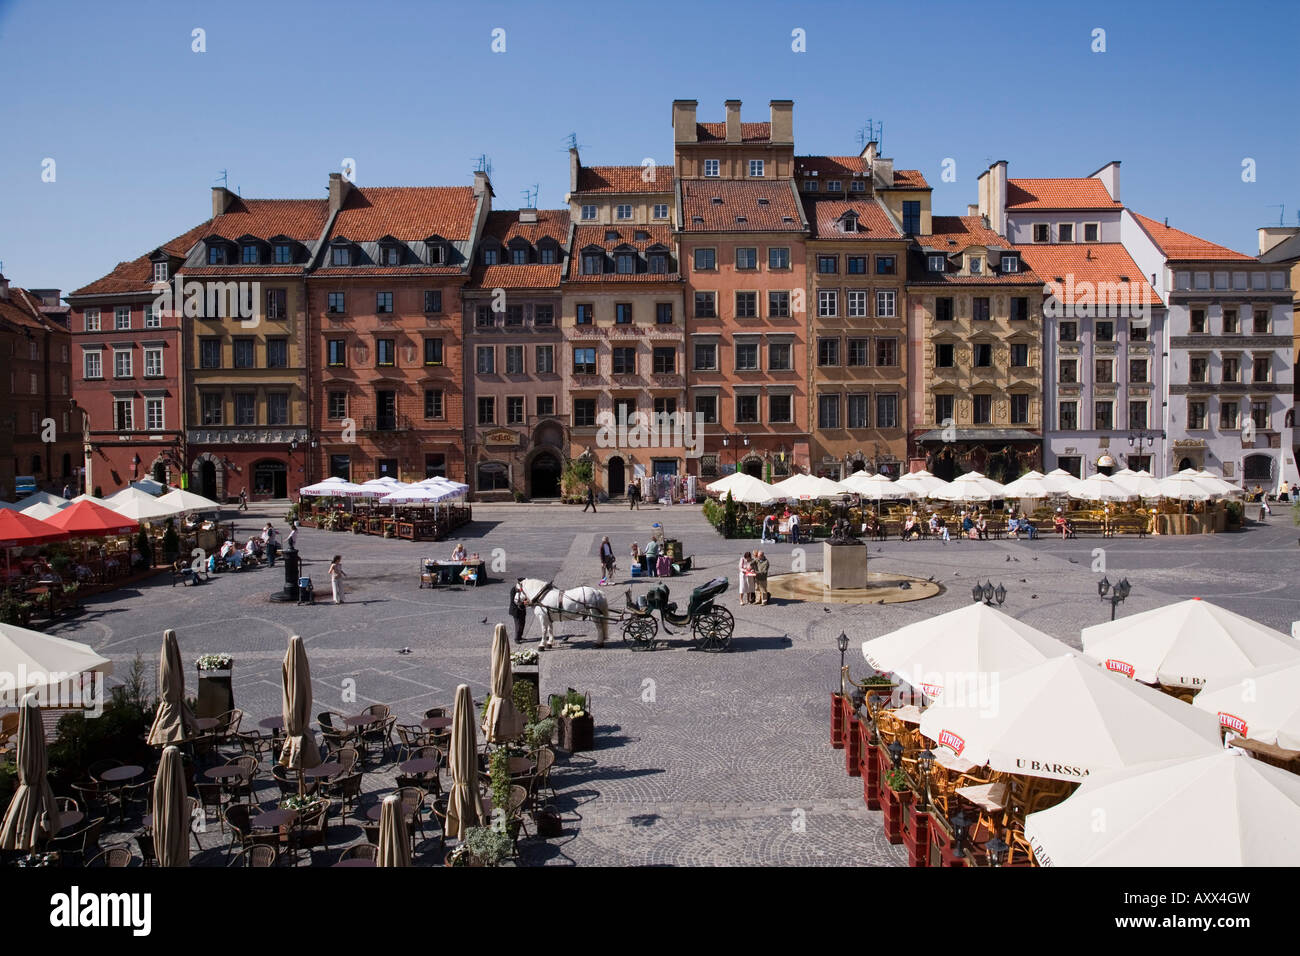 Colourful houses, restaurants and cafes The Old Town Square (Rynek Stare Miasto), UNESCO World Heritage Site, Warsaw, Poland Stock Photo